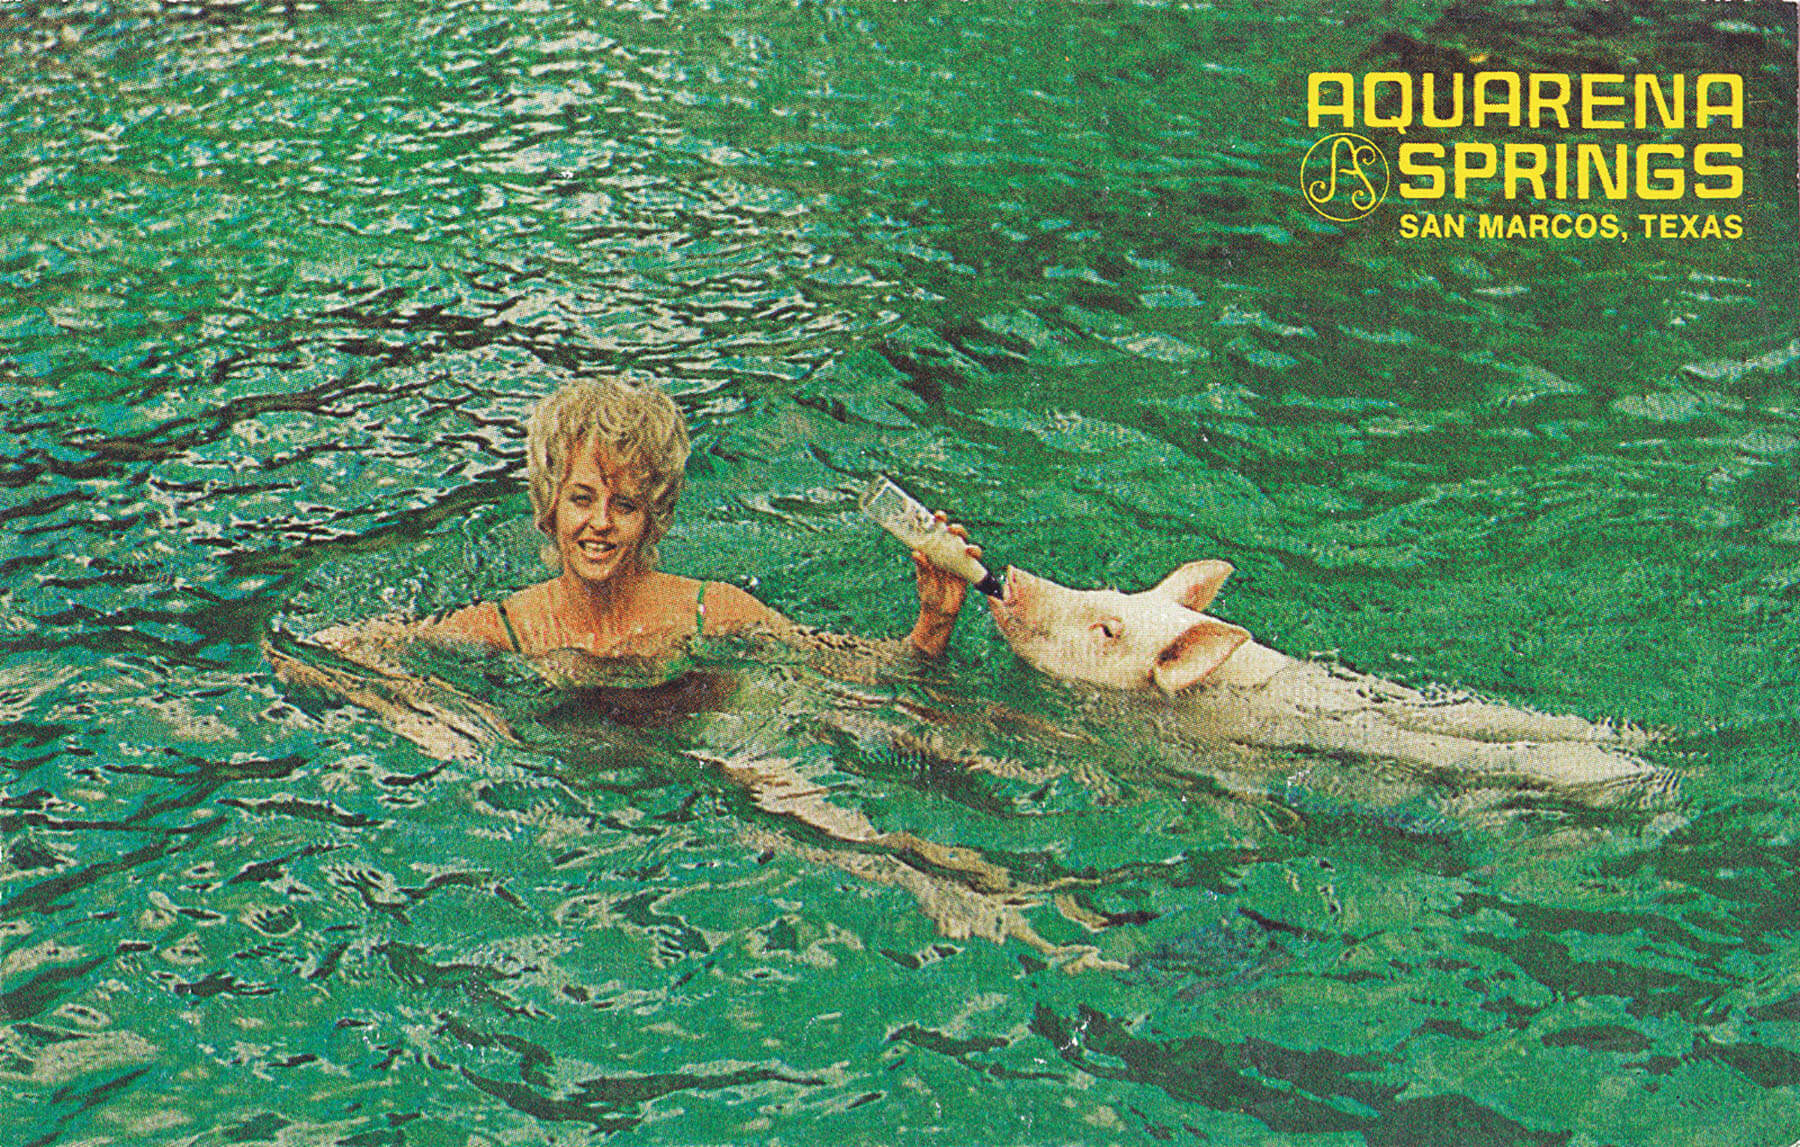 A woman swims with a pig in bright green water